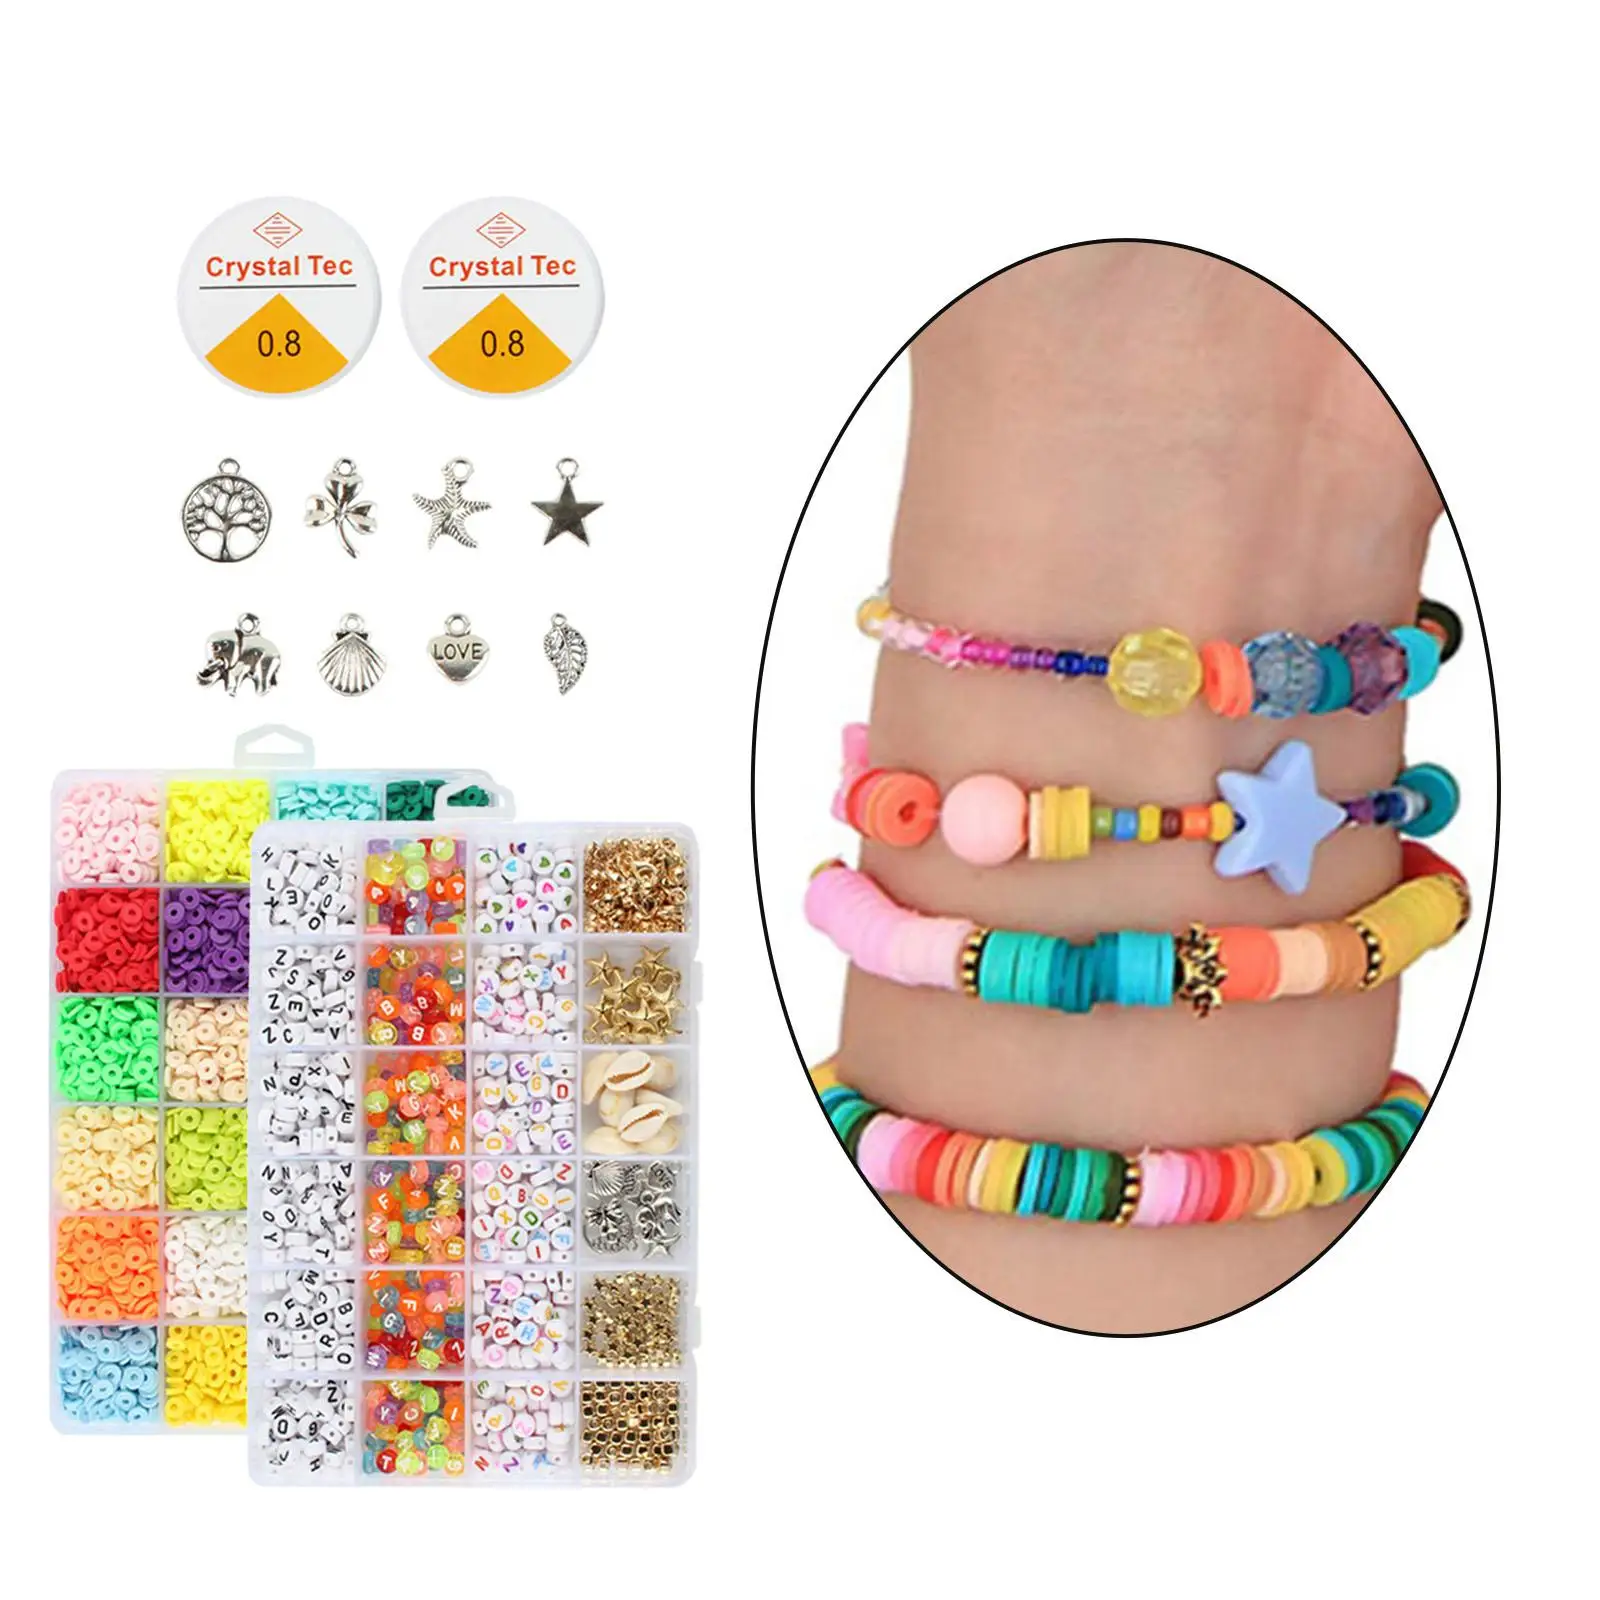 Polymer Clay Beads DIY Bracelets Jewelry Making Finding Crafts Supplies